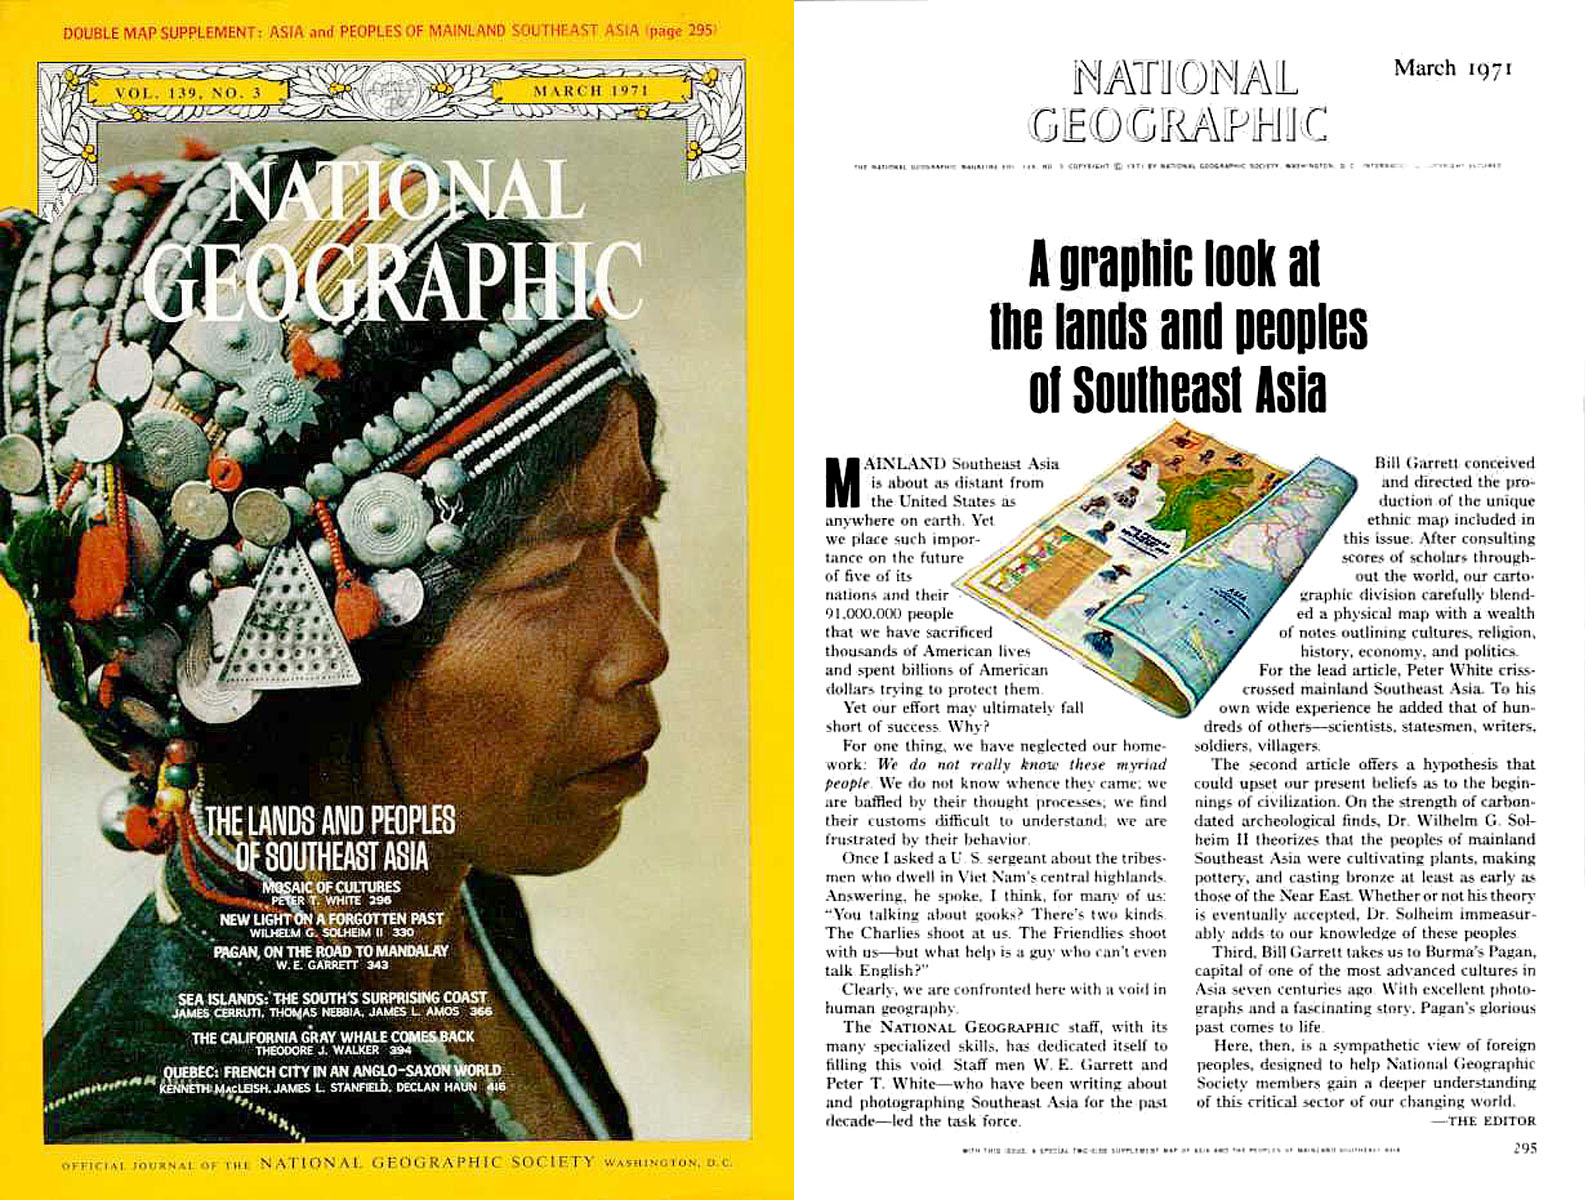 We’ve always known that National Geographic is racist